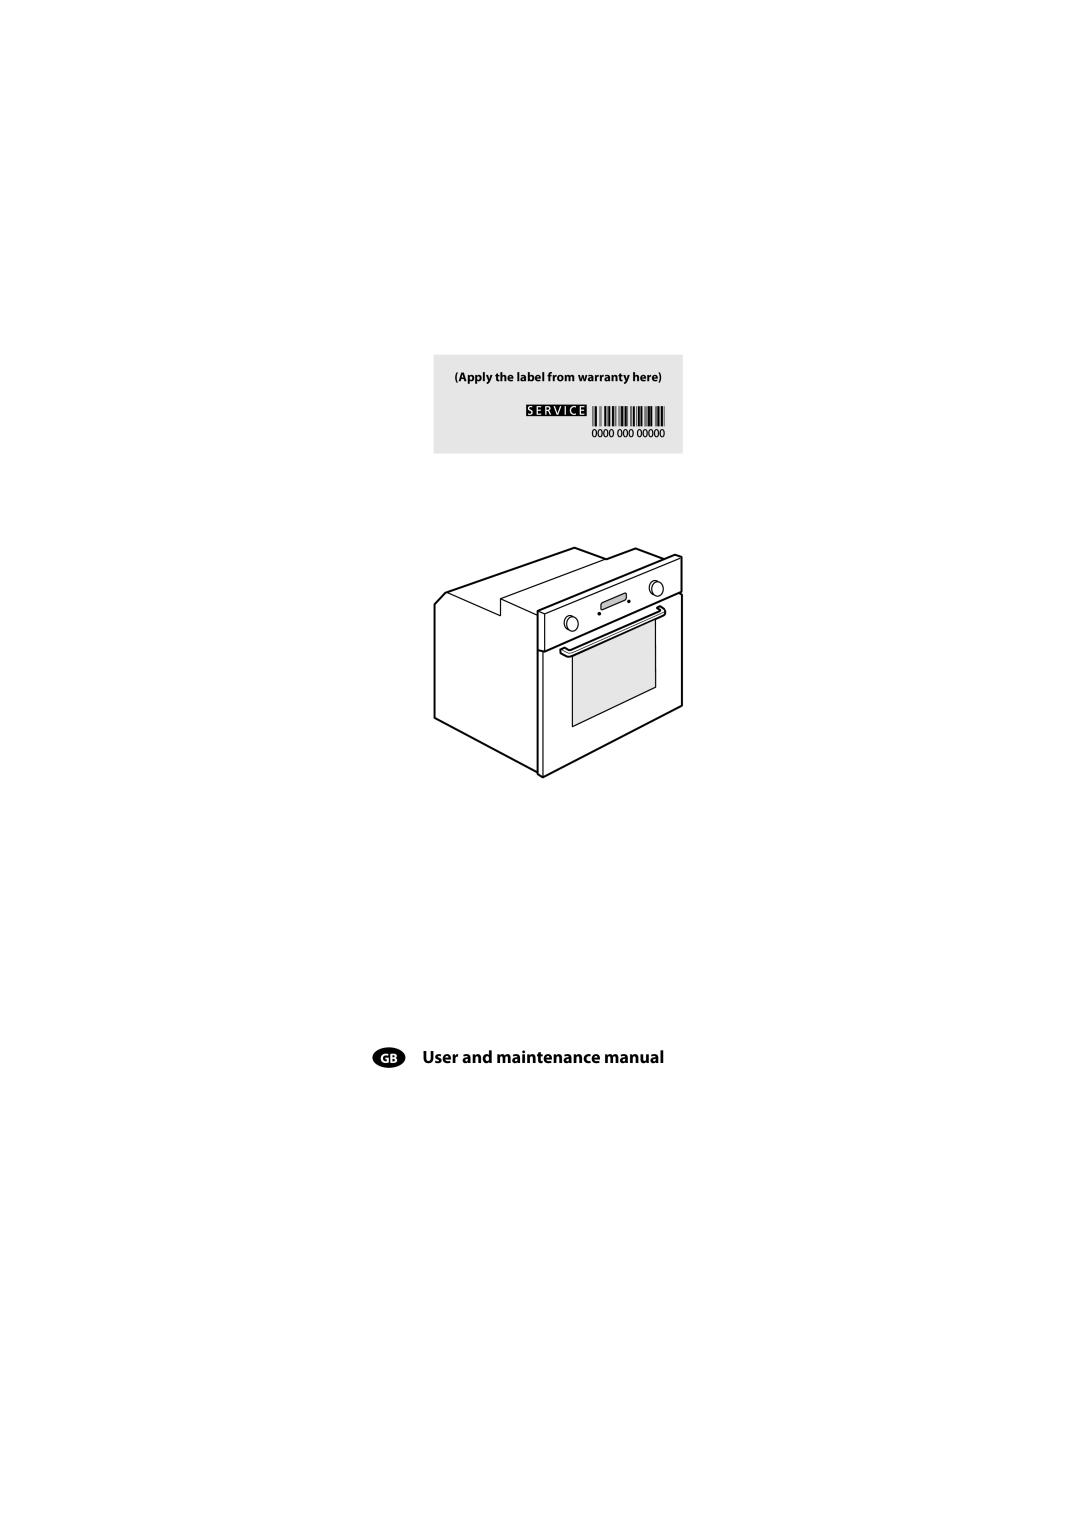 Whirlpool GB1 warranty Apply the label from warranty here, User and maintenance manual 